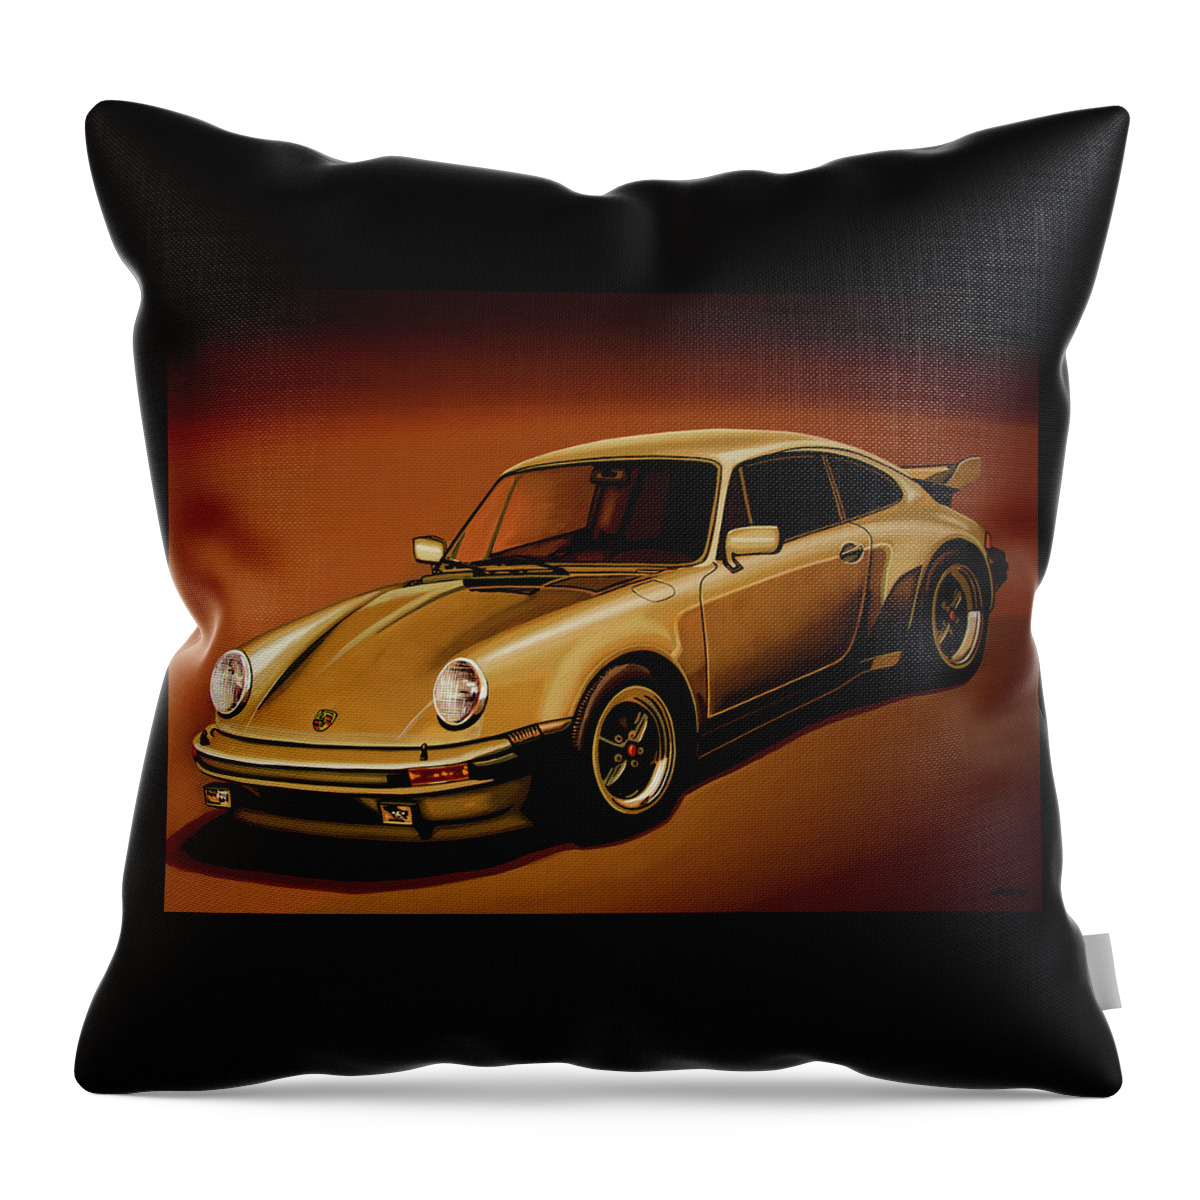 Porsche 911 Throw Pillow featuring the painting Porsche 911 Turbo 1976 Painting by Paul Meijering